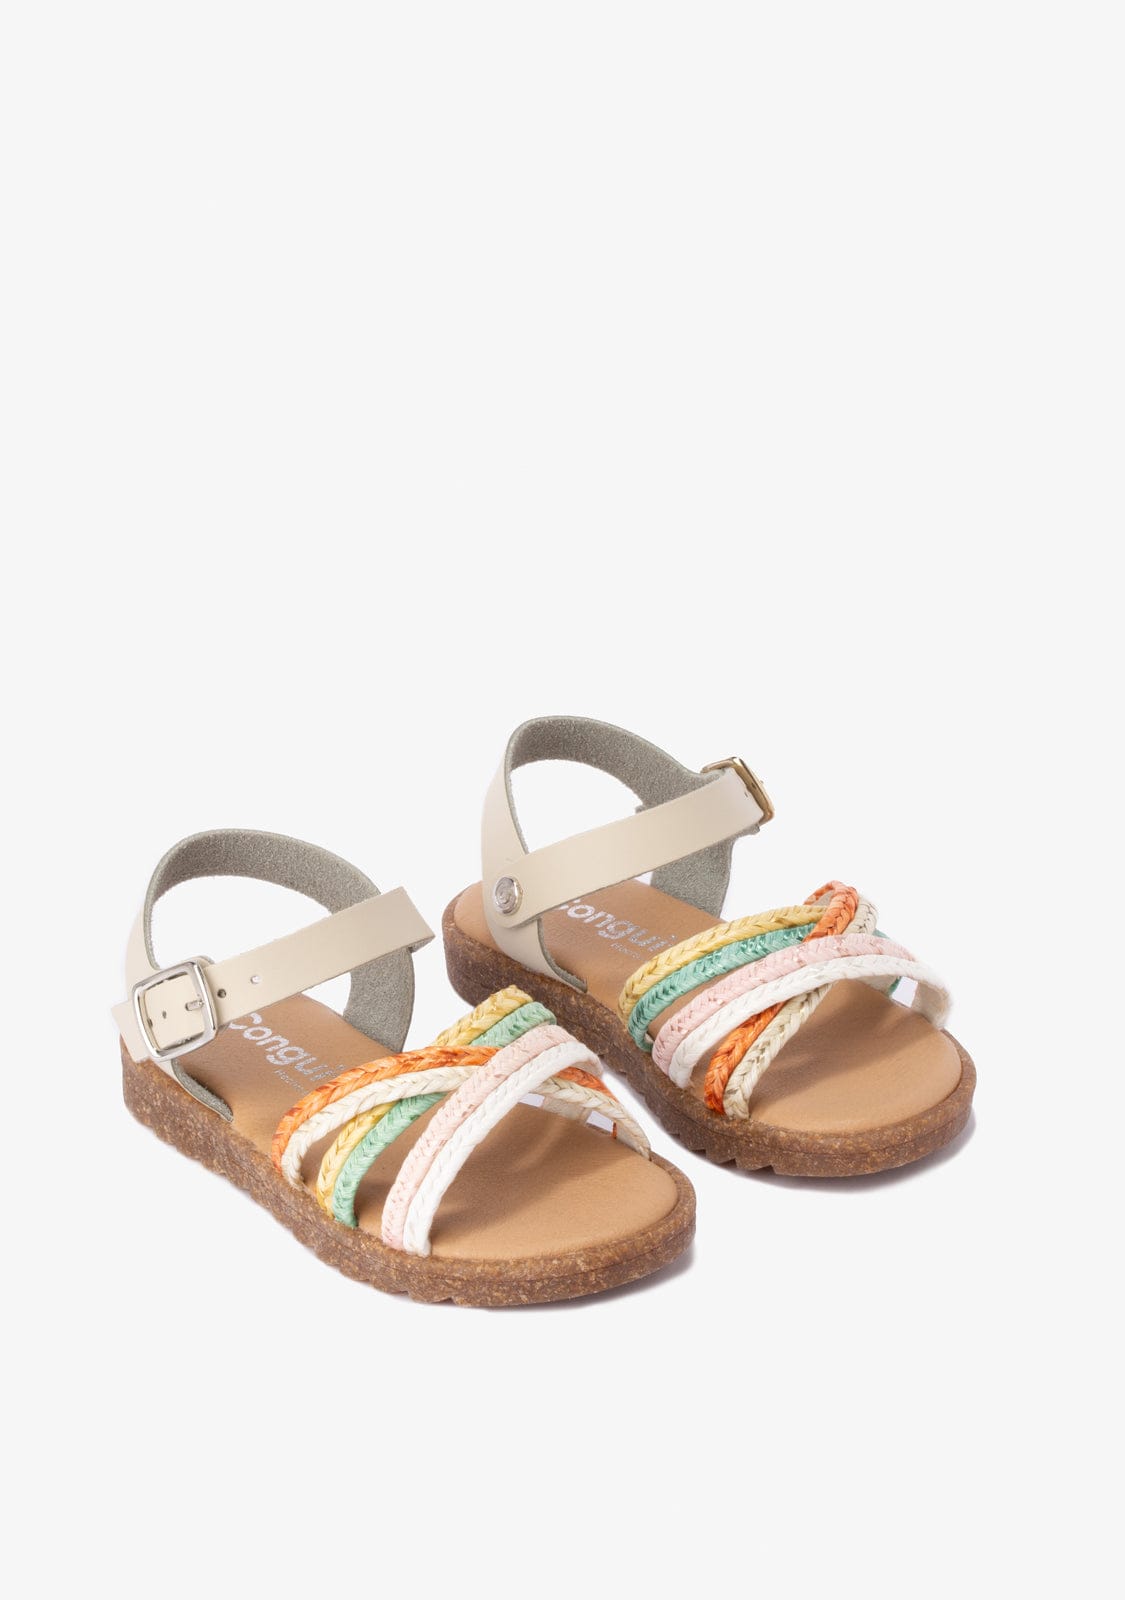 CONGUITOS Shoes Girl's Multicolour Braided Sandals